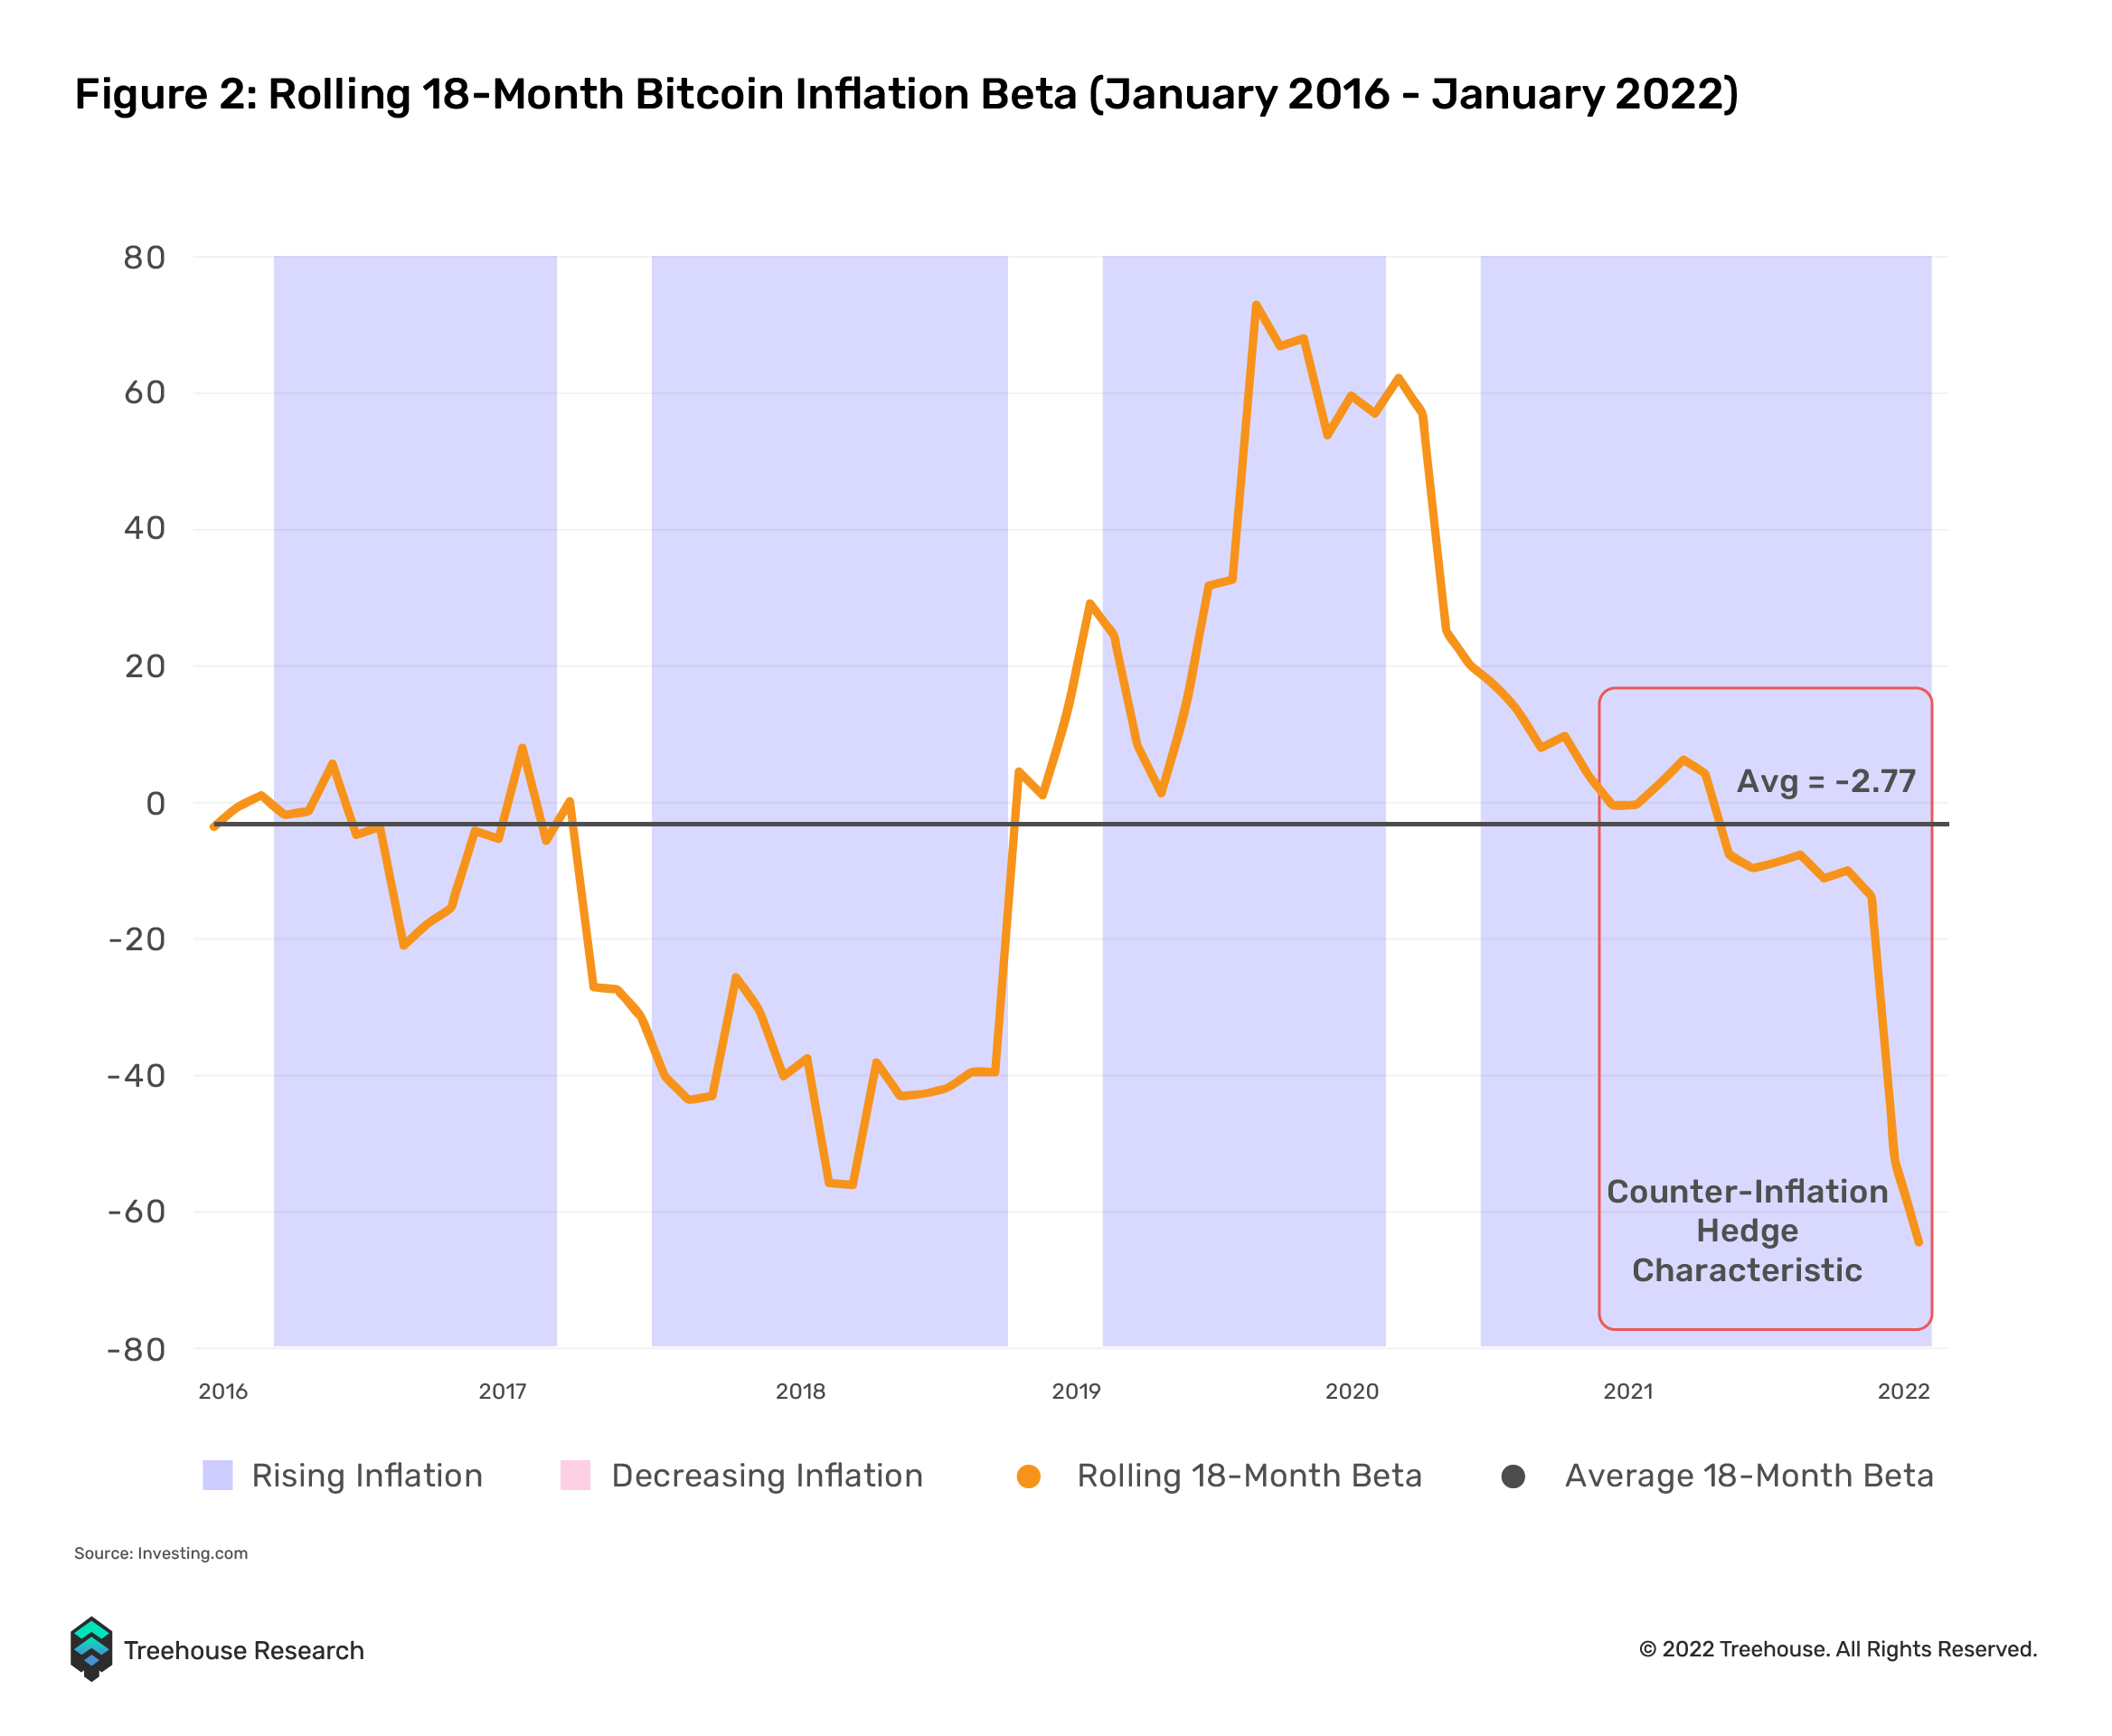 rolling 18-month bitcoin inflation beta